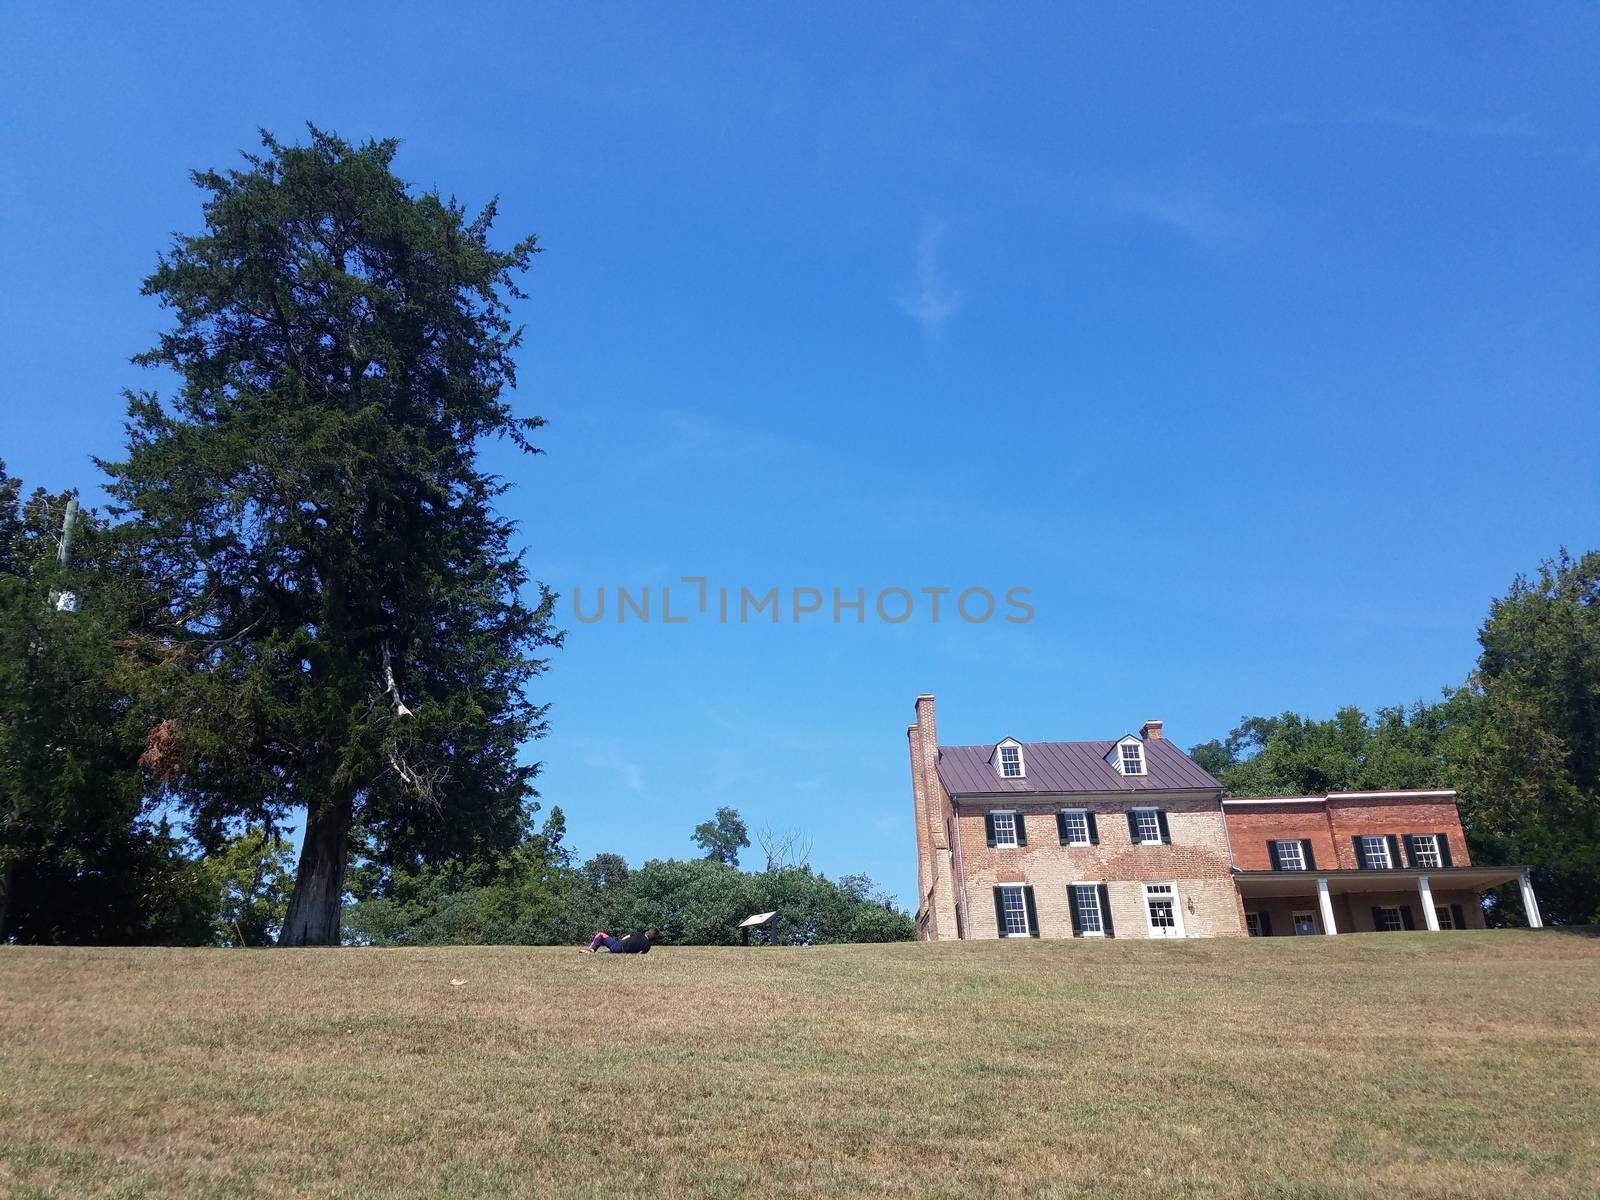 child rolling down a grassy hill or lawn with house